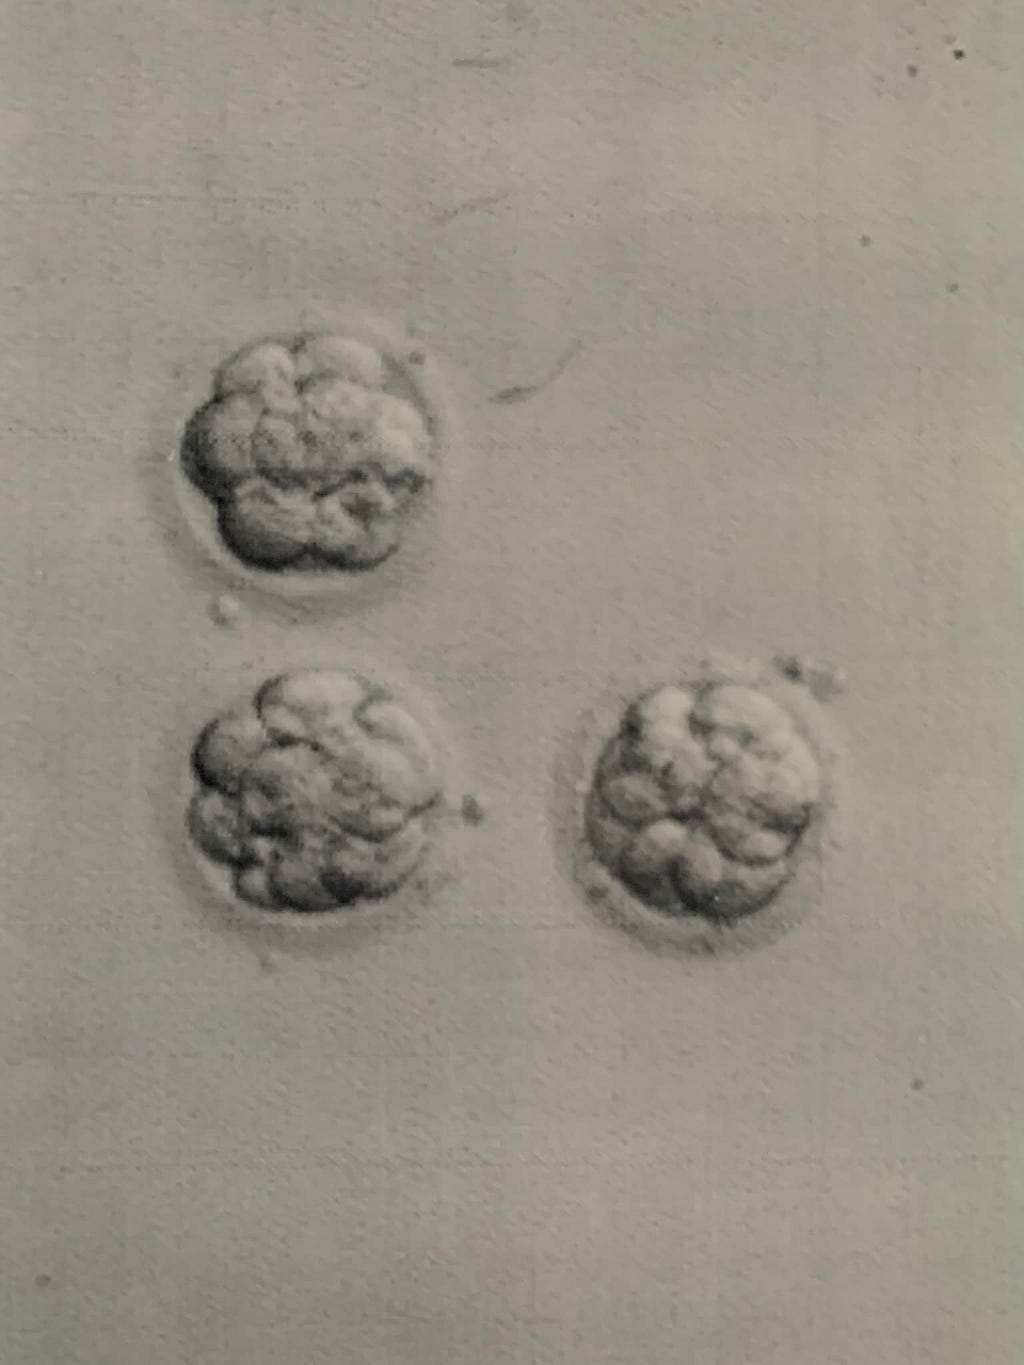 An image of three 16-cell blastocysts during a process of in vitro fertilization (IVF).